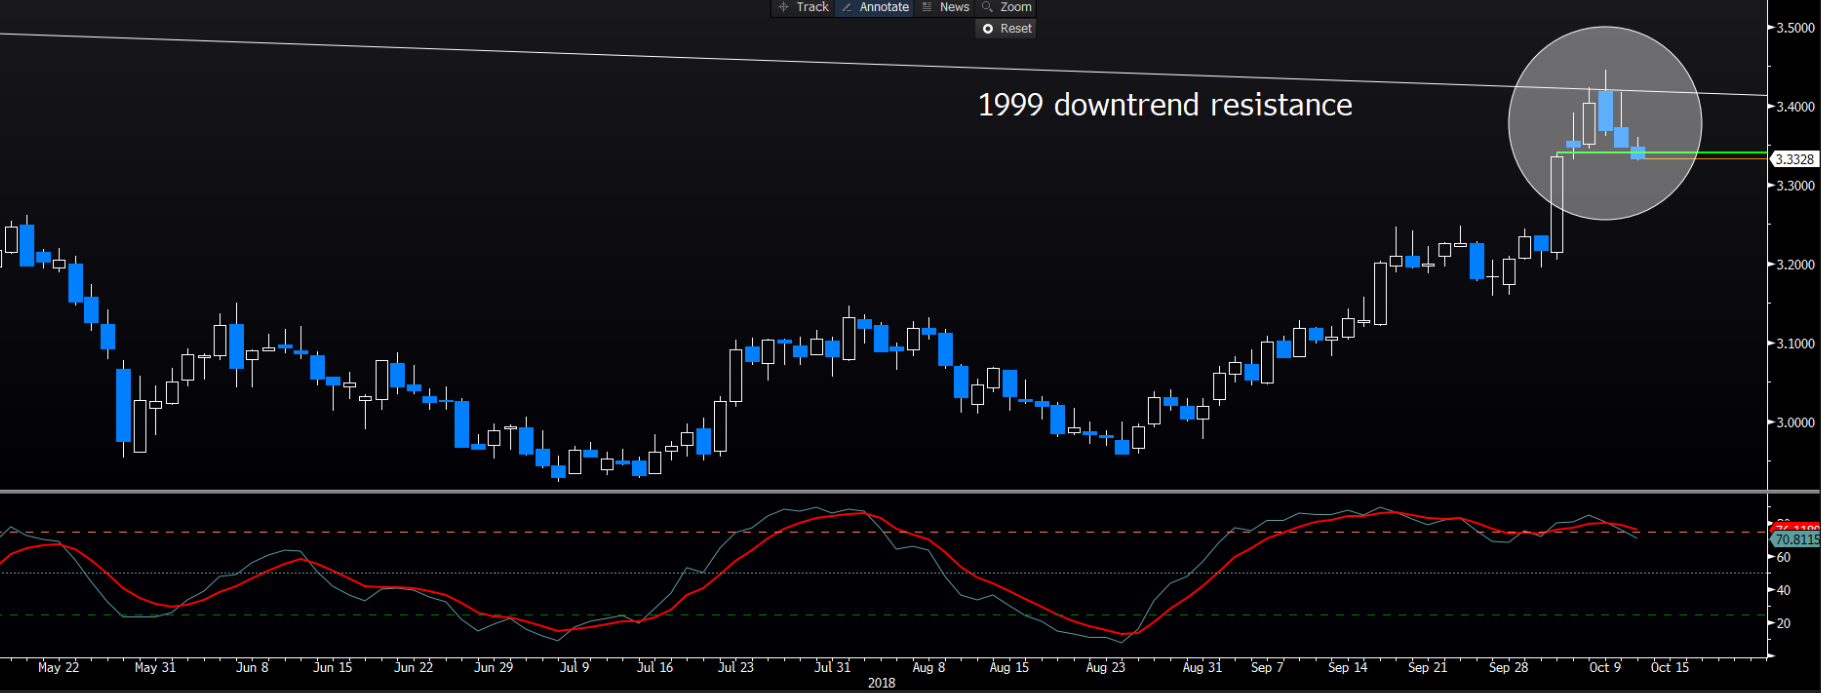 1999 Downtrend Resistance